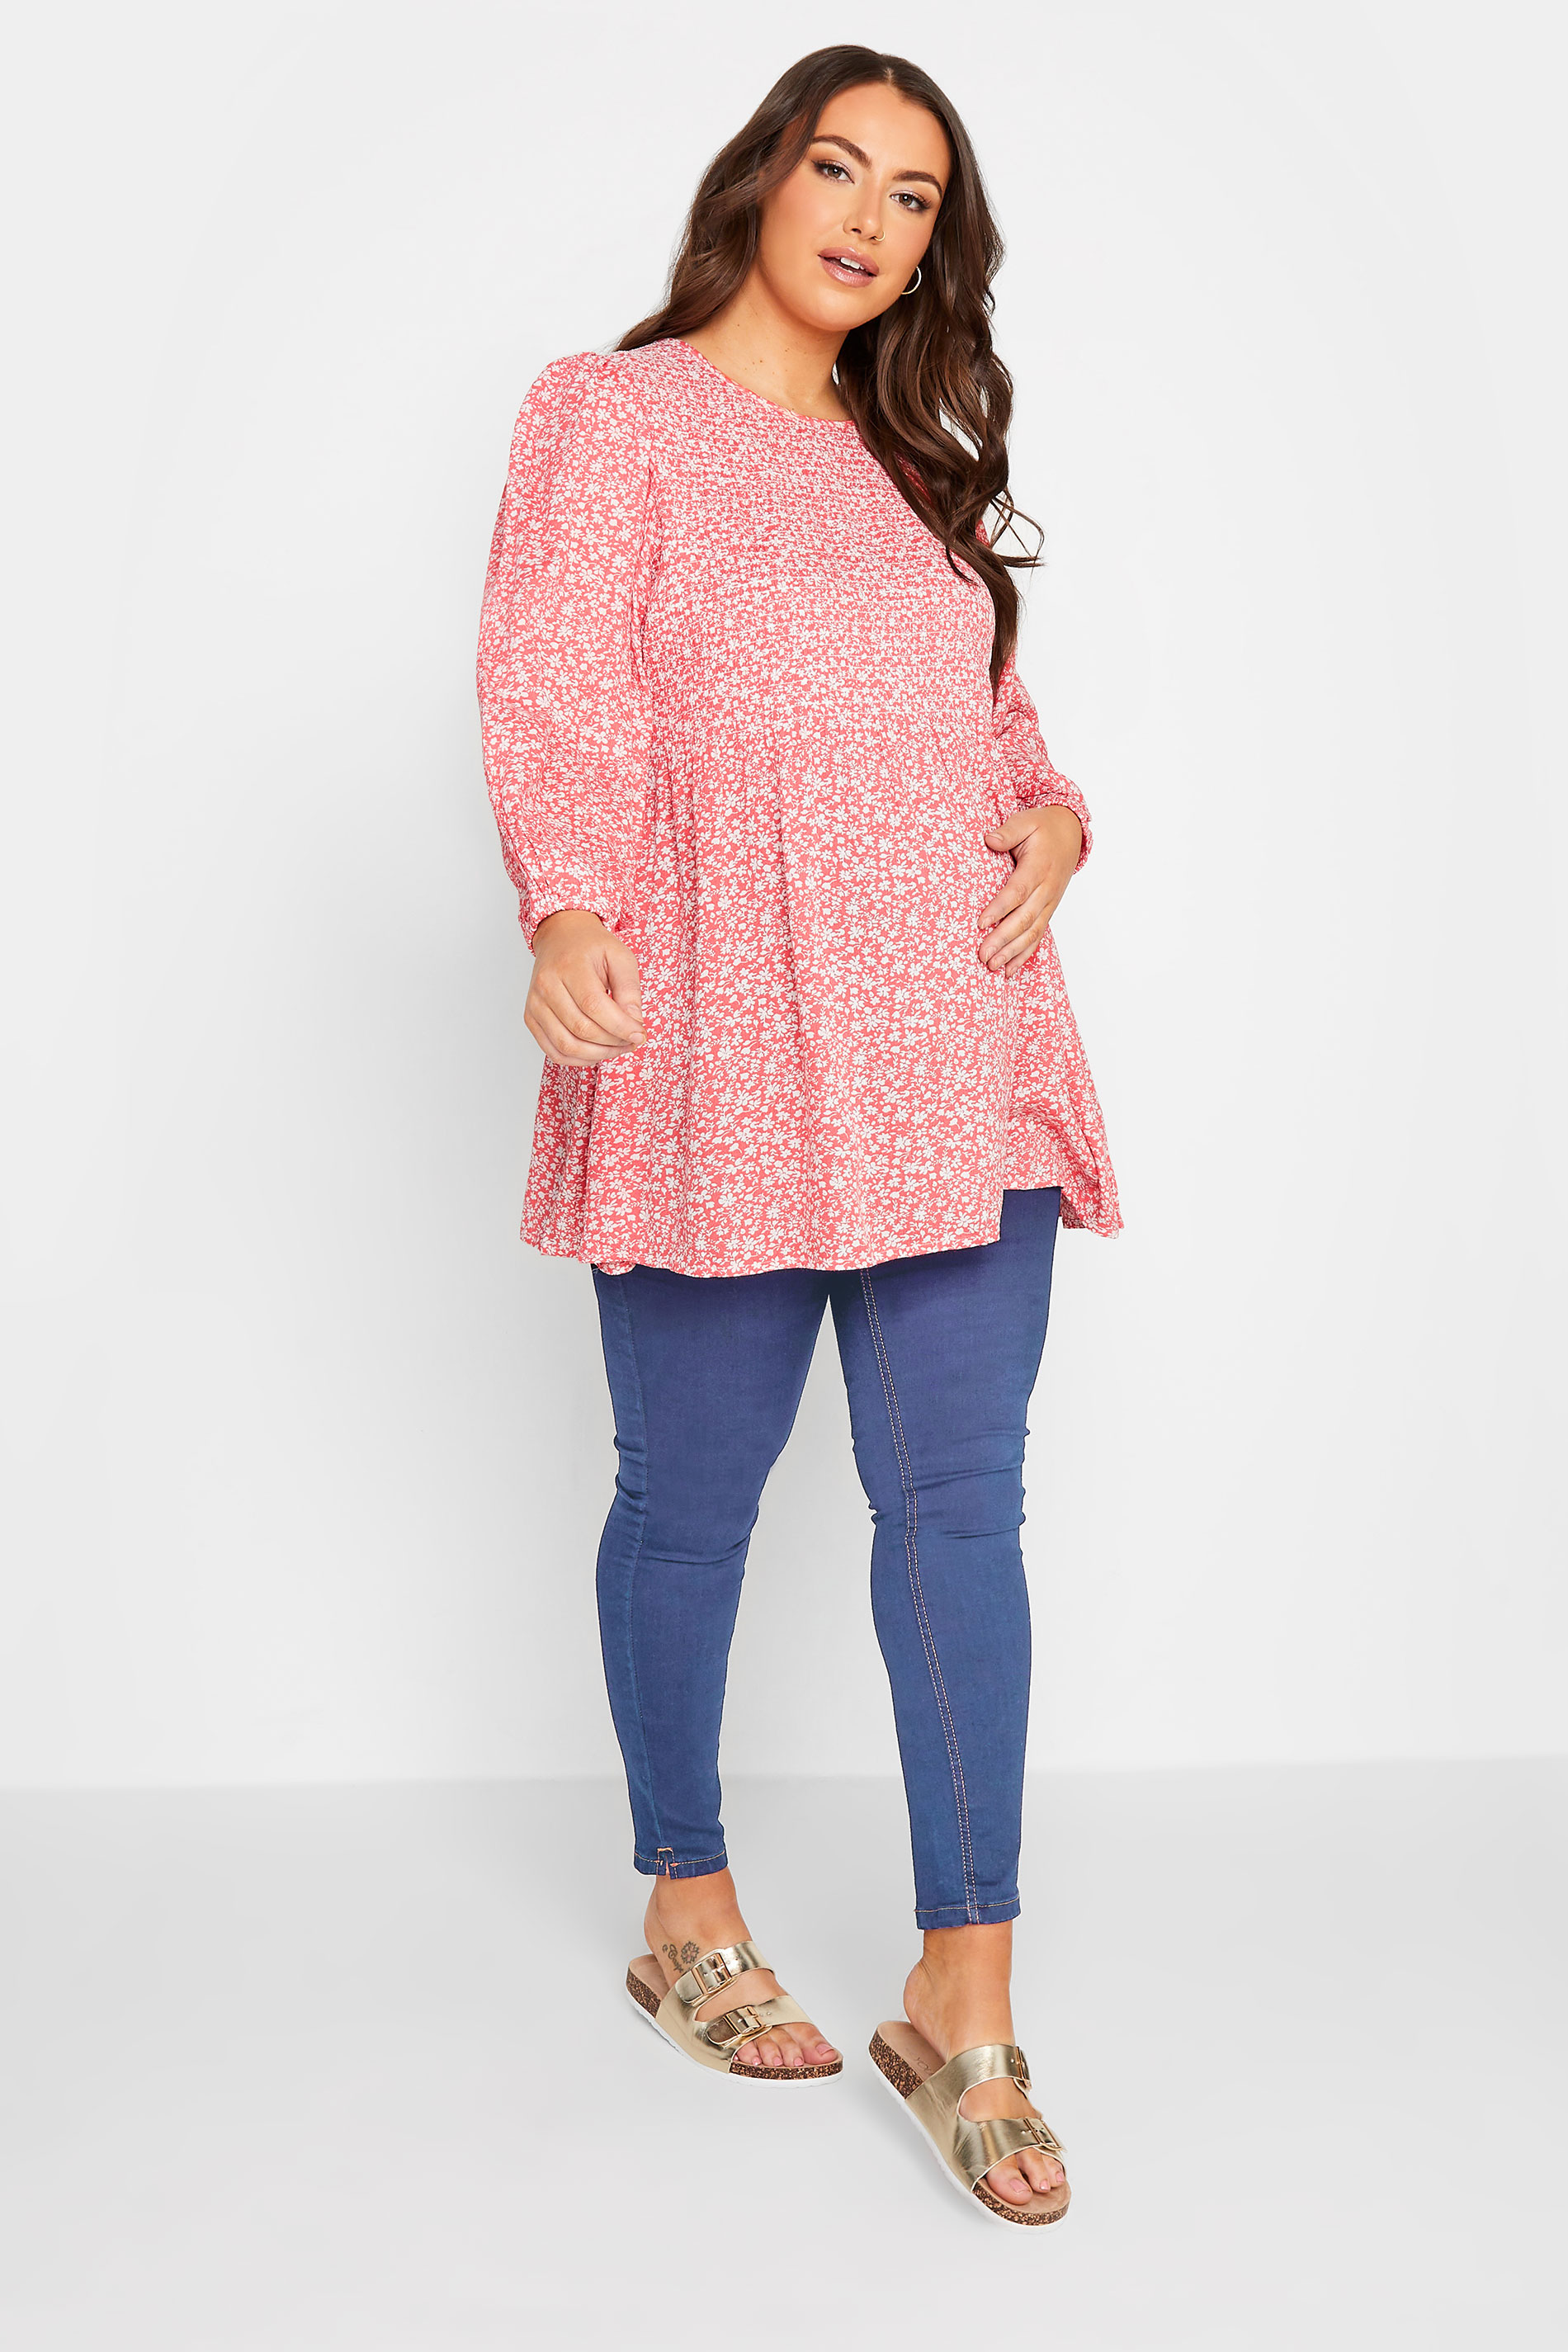 BUMP IT UP MATERNITY Plus Size Pink Ditsy Print Shirred Swing Top | Yours Clothing 2